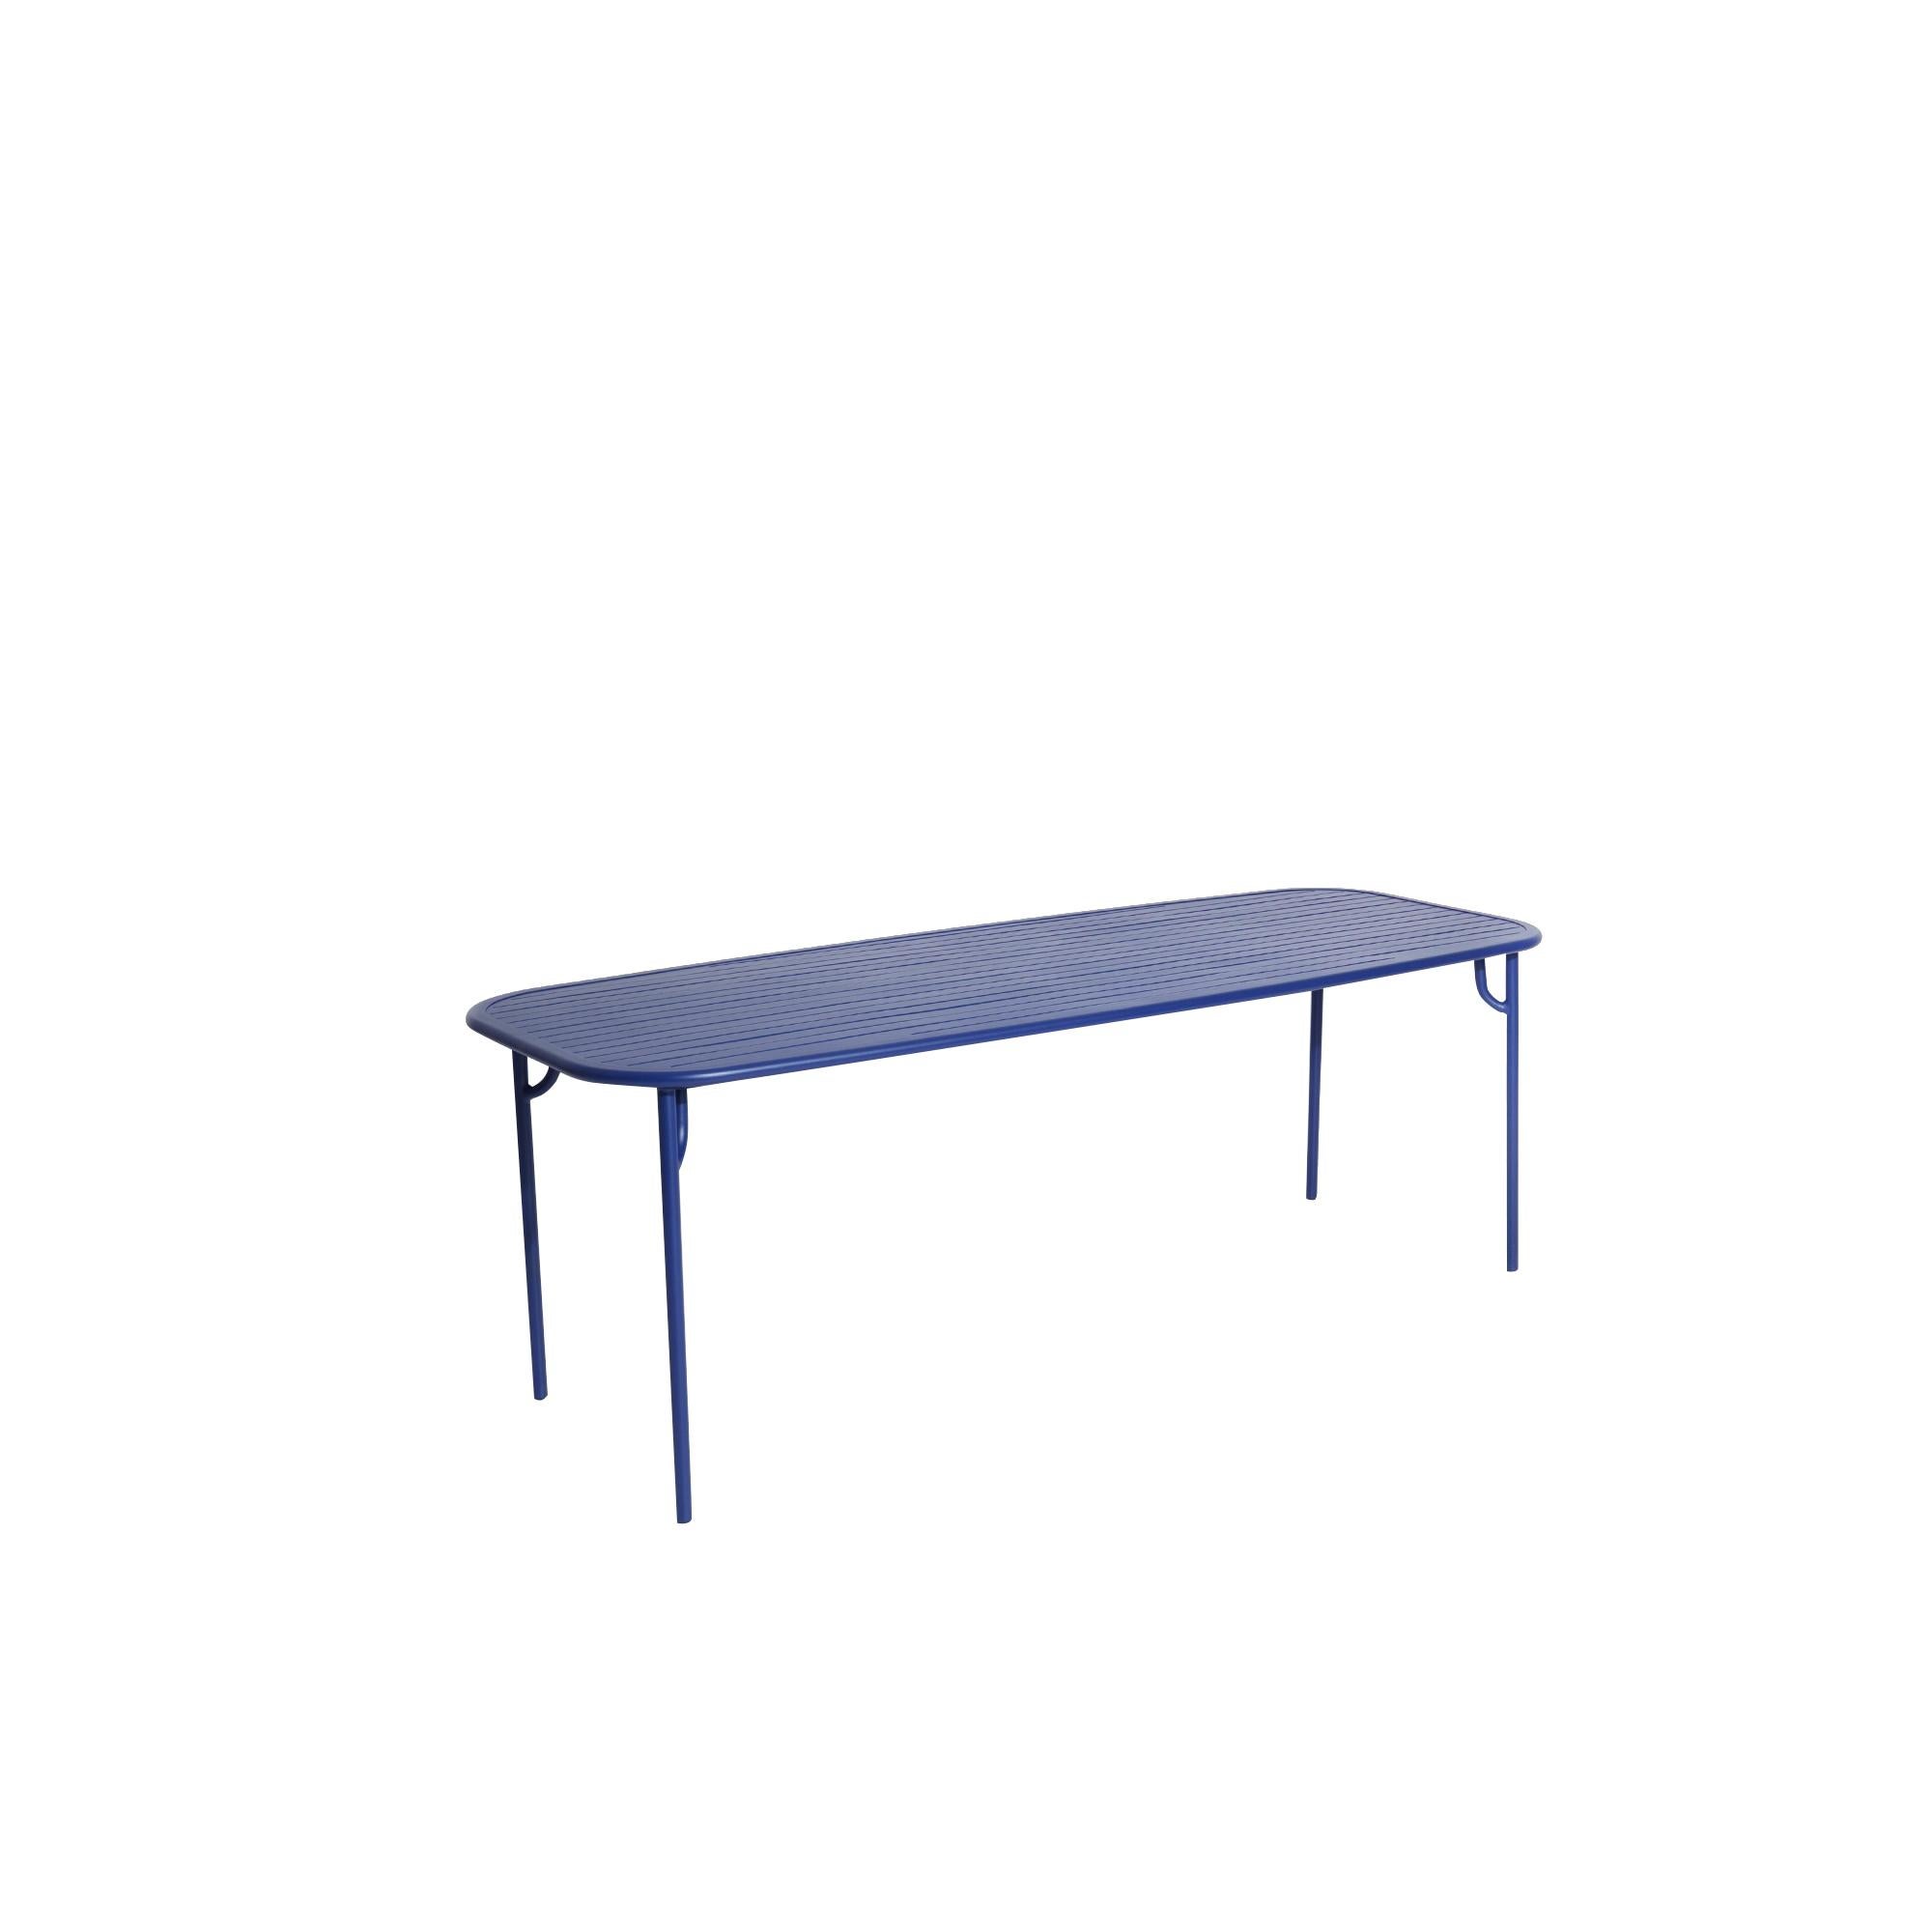 Petite Friture Week-End Large Rectangular Dining Table in Blue Aluminium with Slats by Studio BrichetZiegler, 2017

The week-end collection is a full range of outdoor furniture, in aluminium grained epoxy paint, matt finish, that includes 18